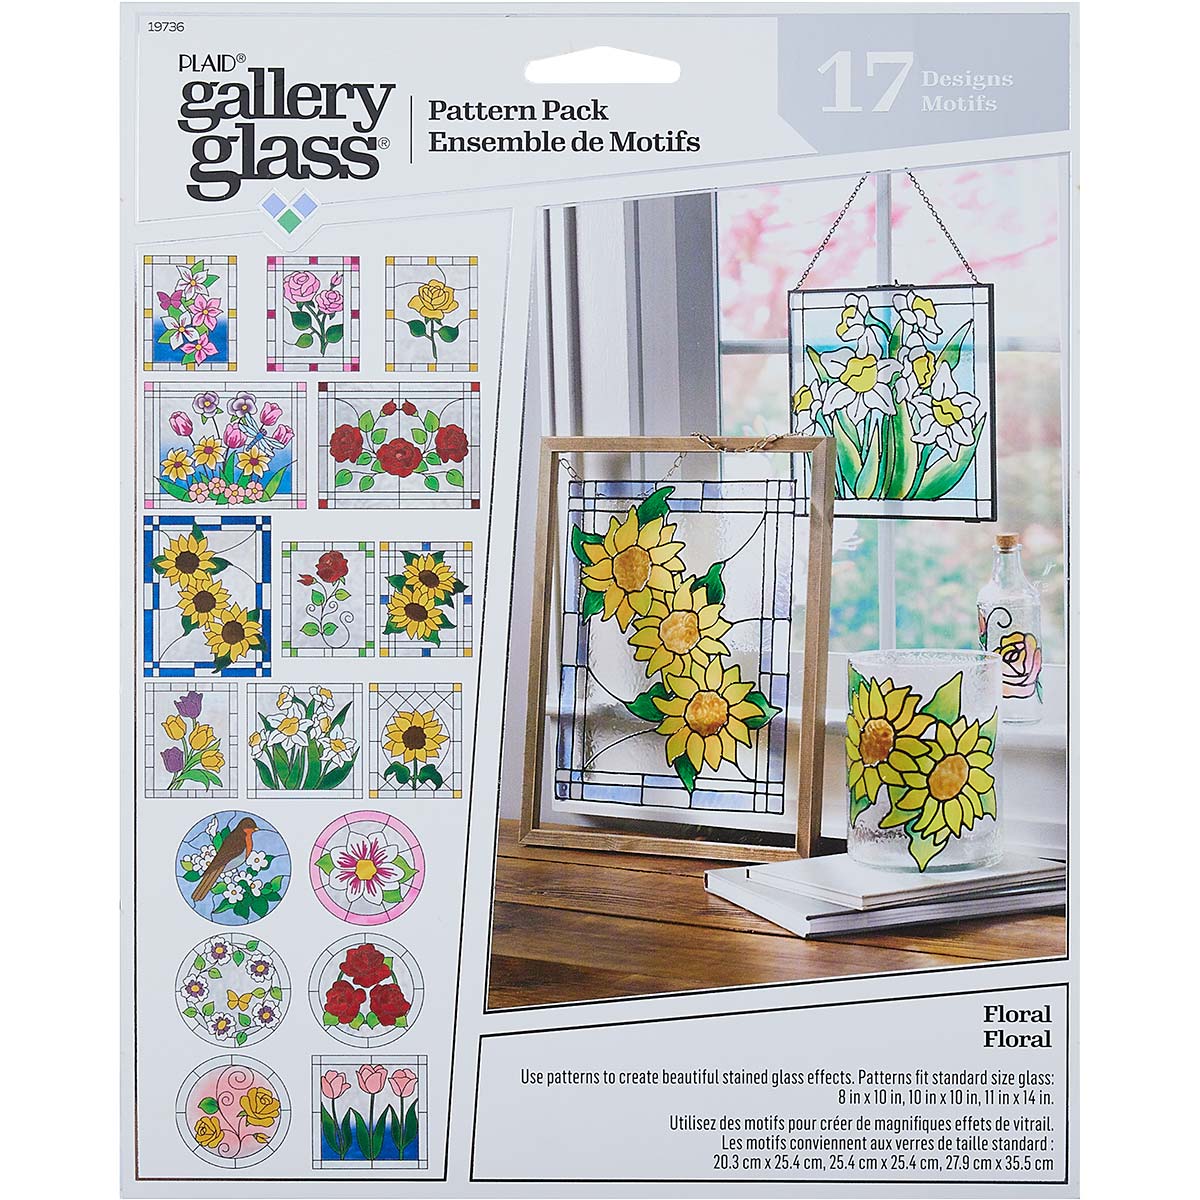 Shop Plaid Gallery Glass ® Pattern Packs - Floral - 19736 - 19736